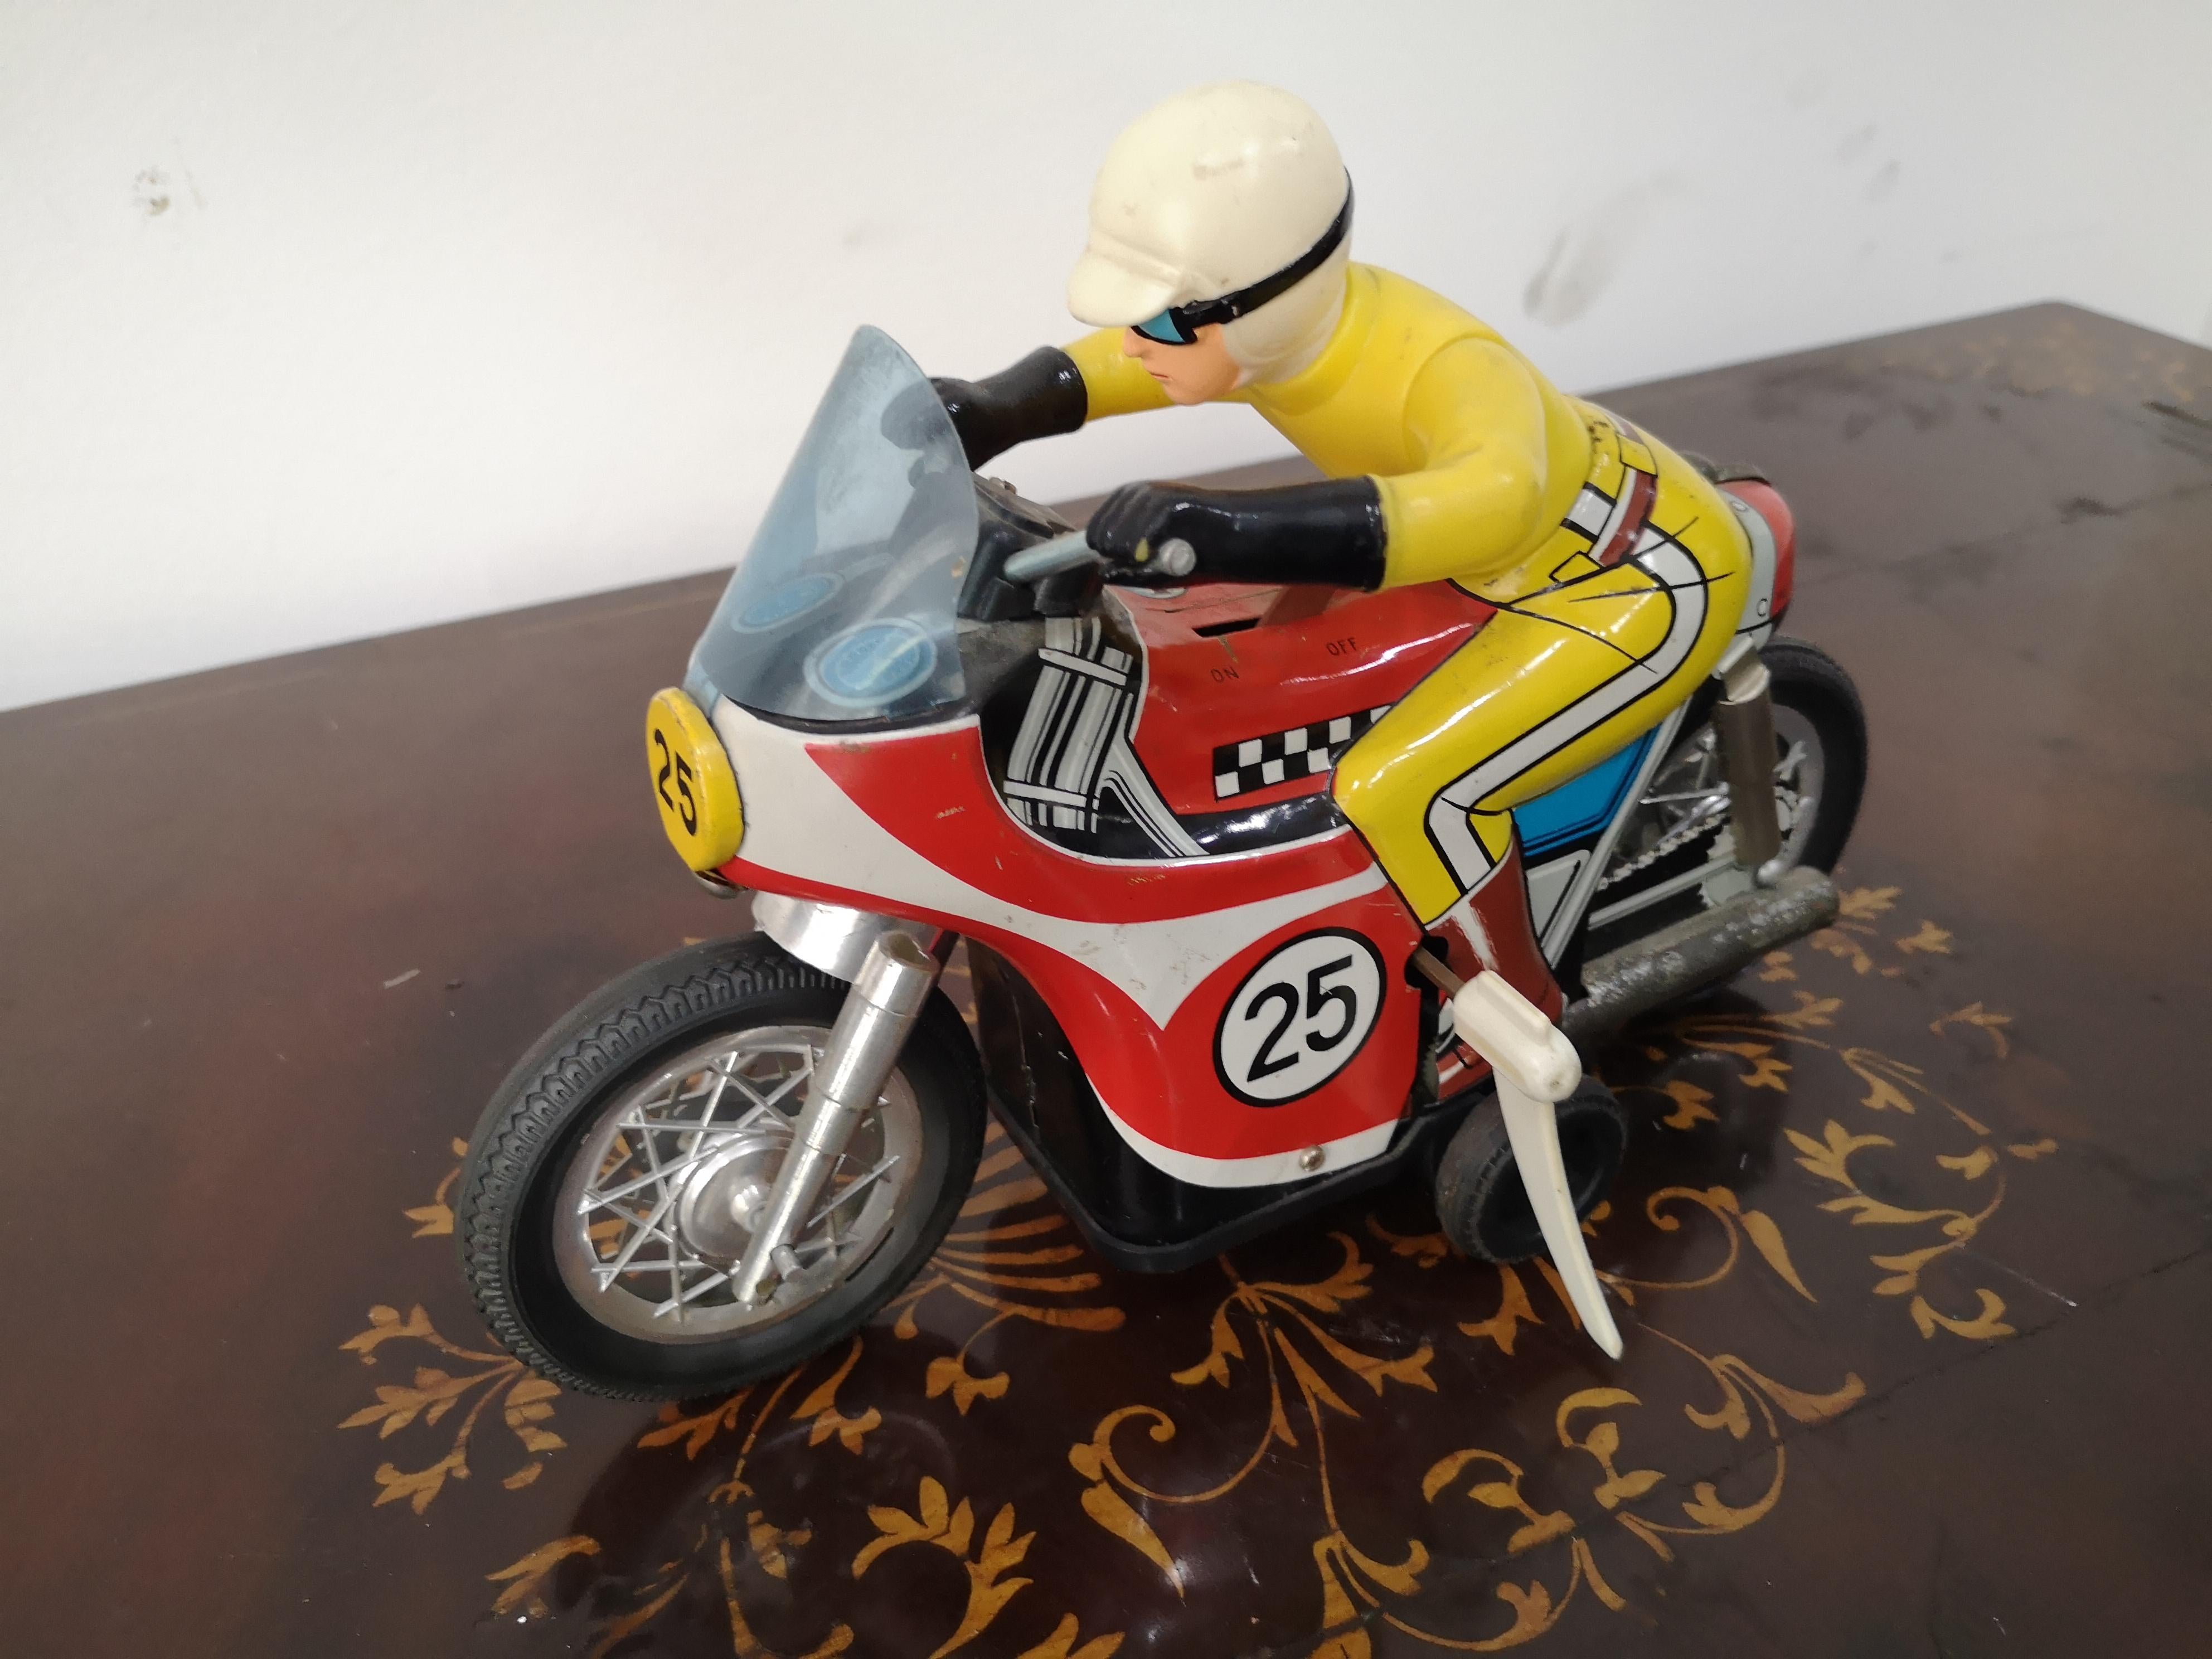 Daiya brand tin motorcycle made in Japan 1960s
in very good condition consistent with the wear and tear of time
See photos in details.
Measures:
Length  27 cms
Width   13 cm
Height        19 cm
Available for clarification or additional photos.